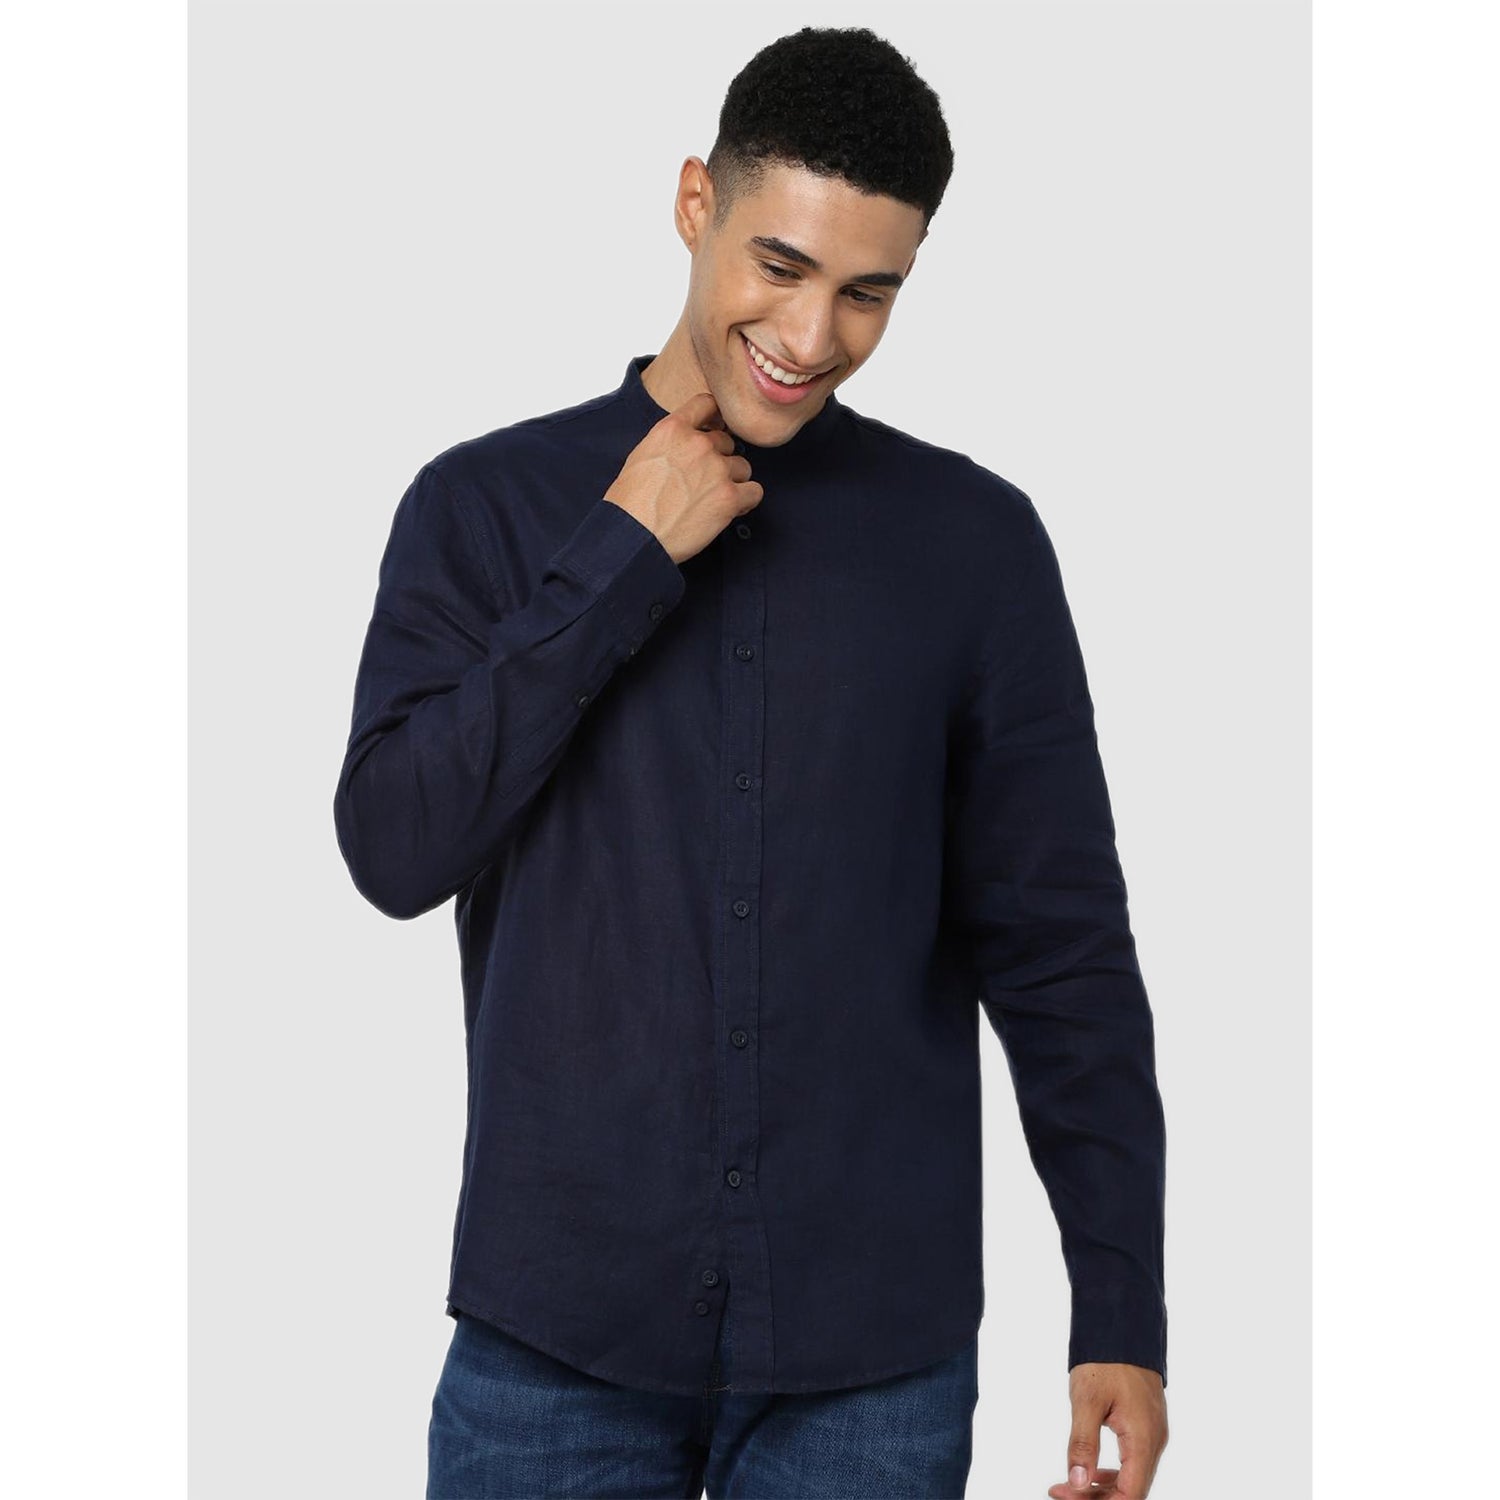 Navy Blue Solid Regular Fit Classic Casual Shirt (BAMAOFLAX)